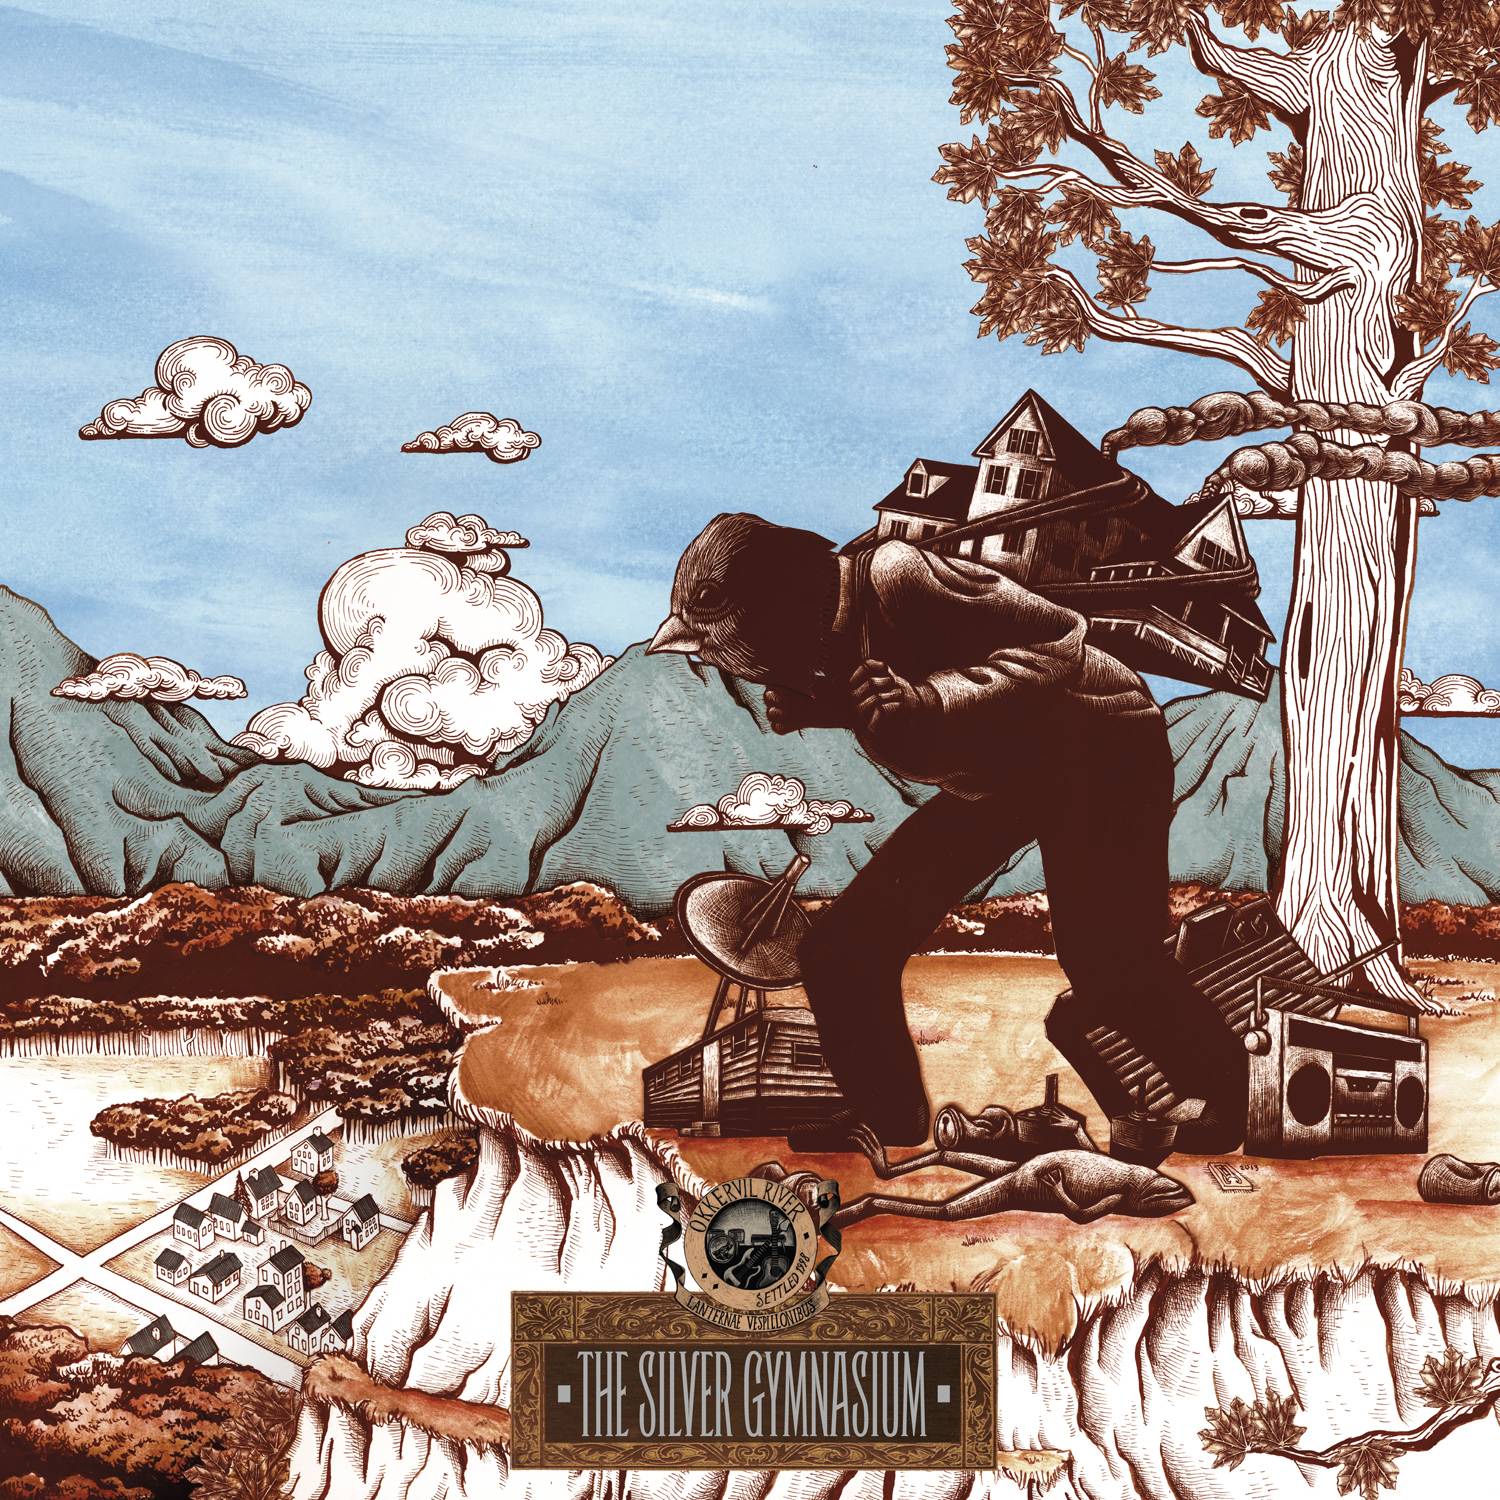 Okkervil River Detail New Album, “The Silver Gymnasium,” Including Cover Art and Tracklist